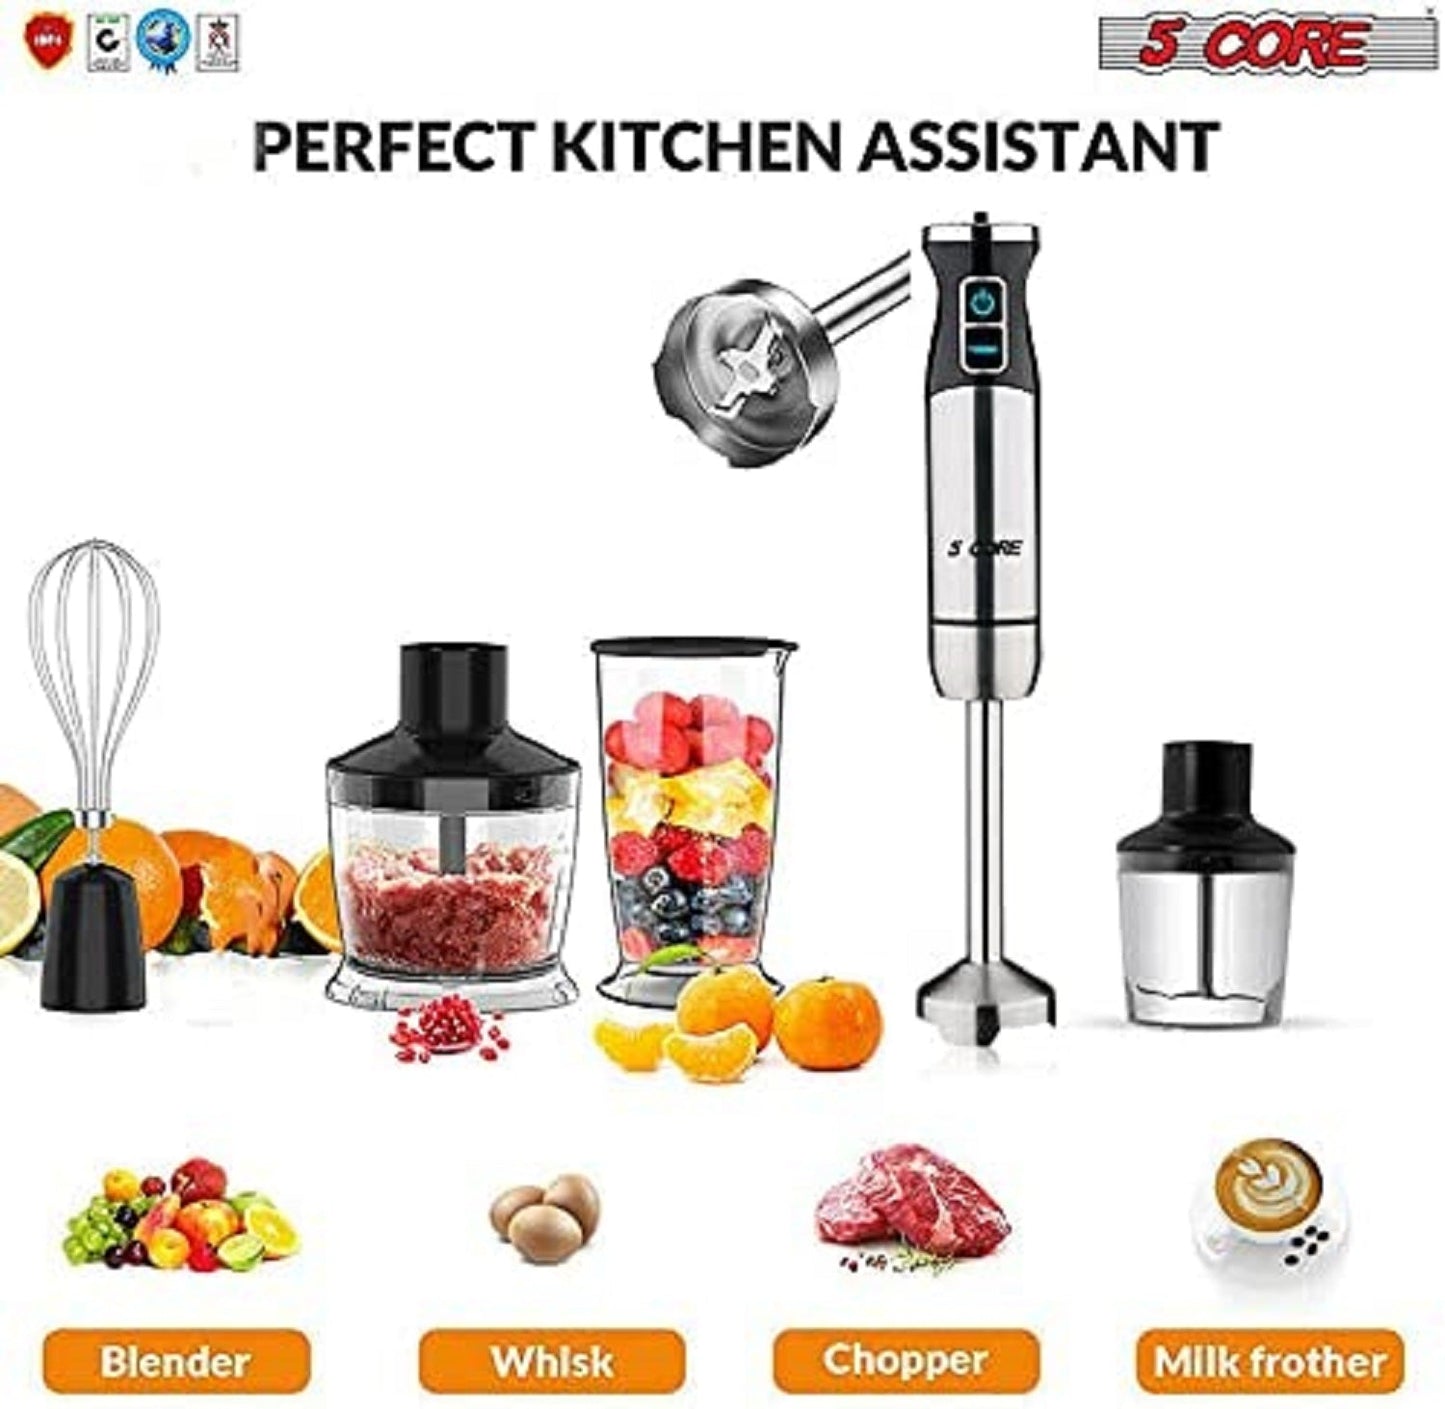 5 Core 5-in-1 Immersion Hand Blender, Powerful 500W Motor- 8 Speed Handheld Stick Blender with 304 Stainless Steel Blades, BPA-Free Milk Frother, Smoothies, Egg Whisk, Puree Infant Food, Sauces and Soups HB 1520-2